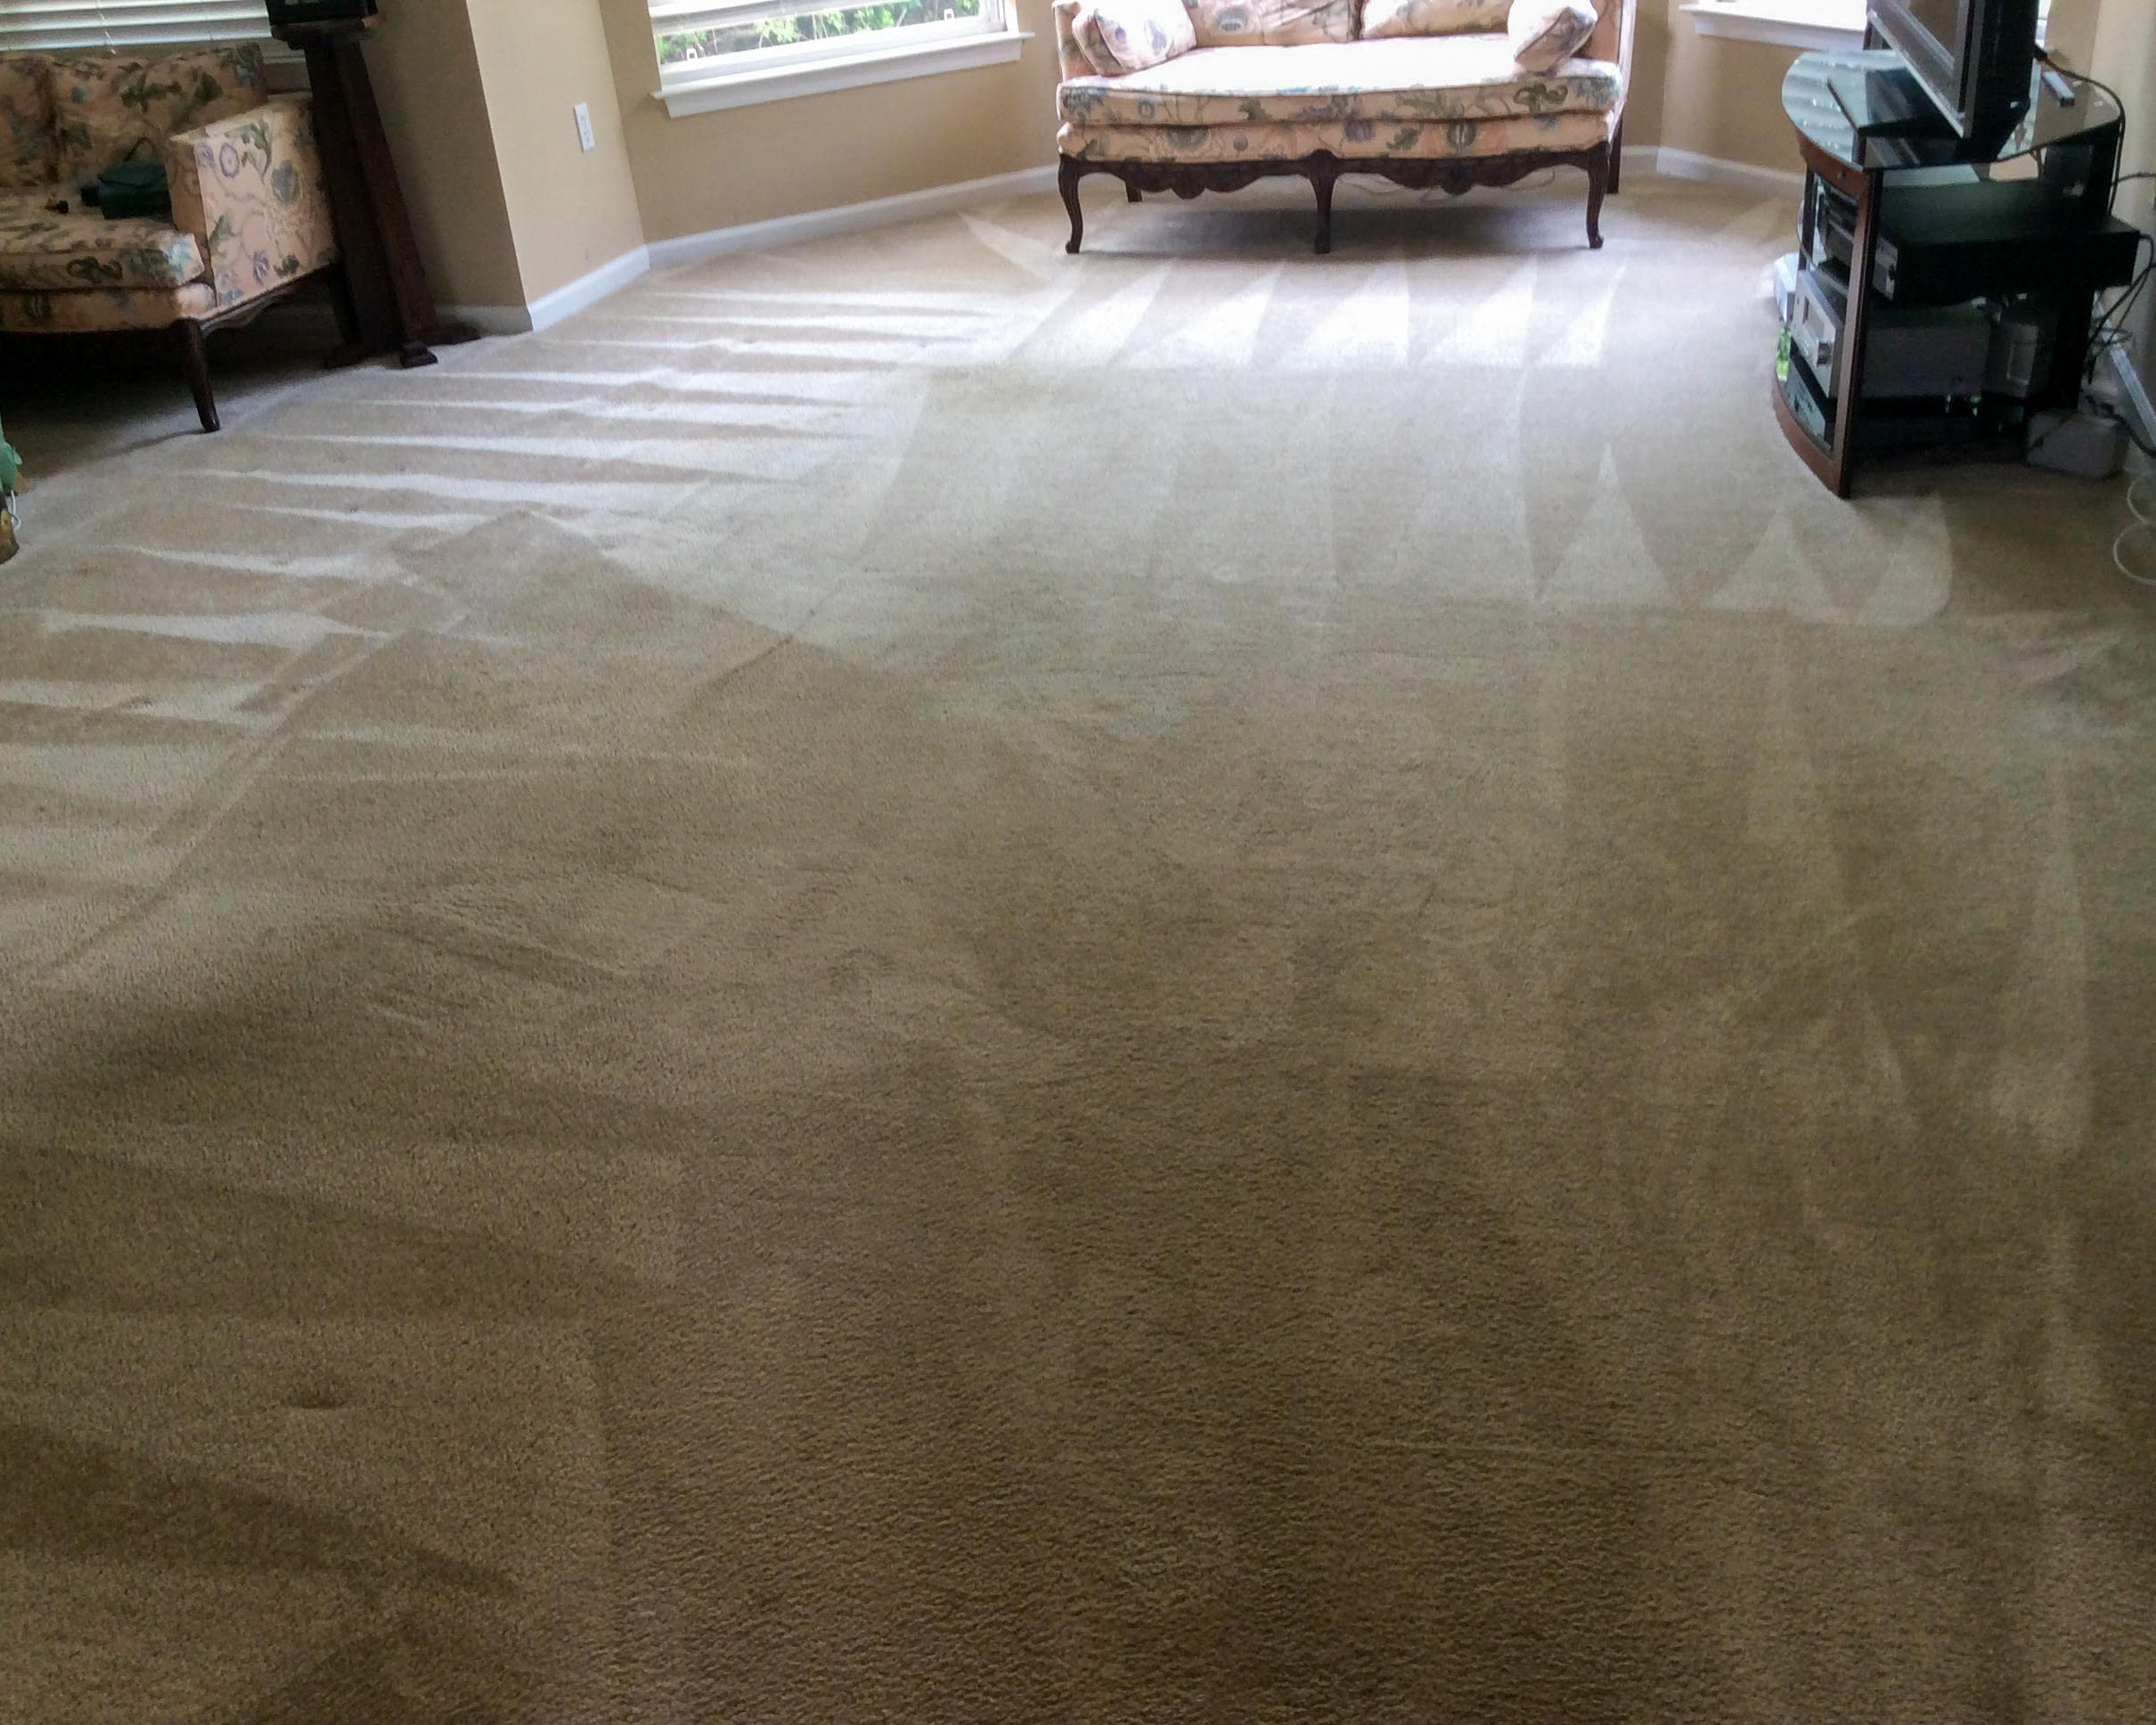 If you notice your carpets or upholstery have seen better days, SERVPRO of Montclair / West Orange has the expertise and equipment to provide a deeper clean to your West Orange home.